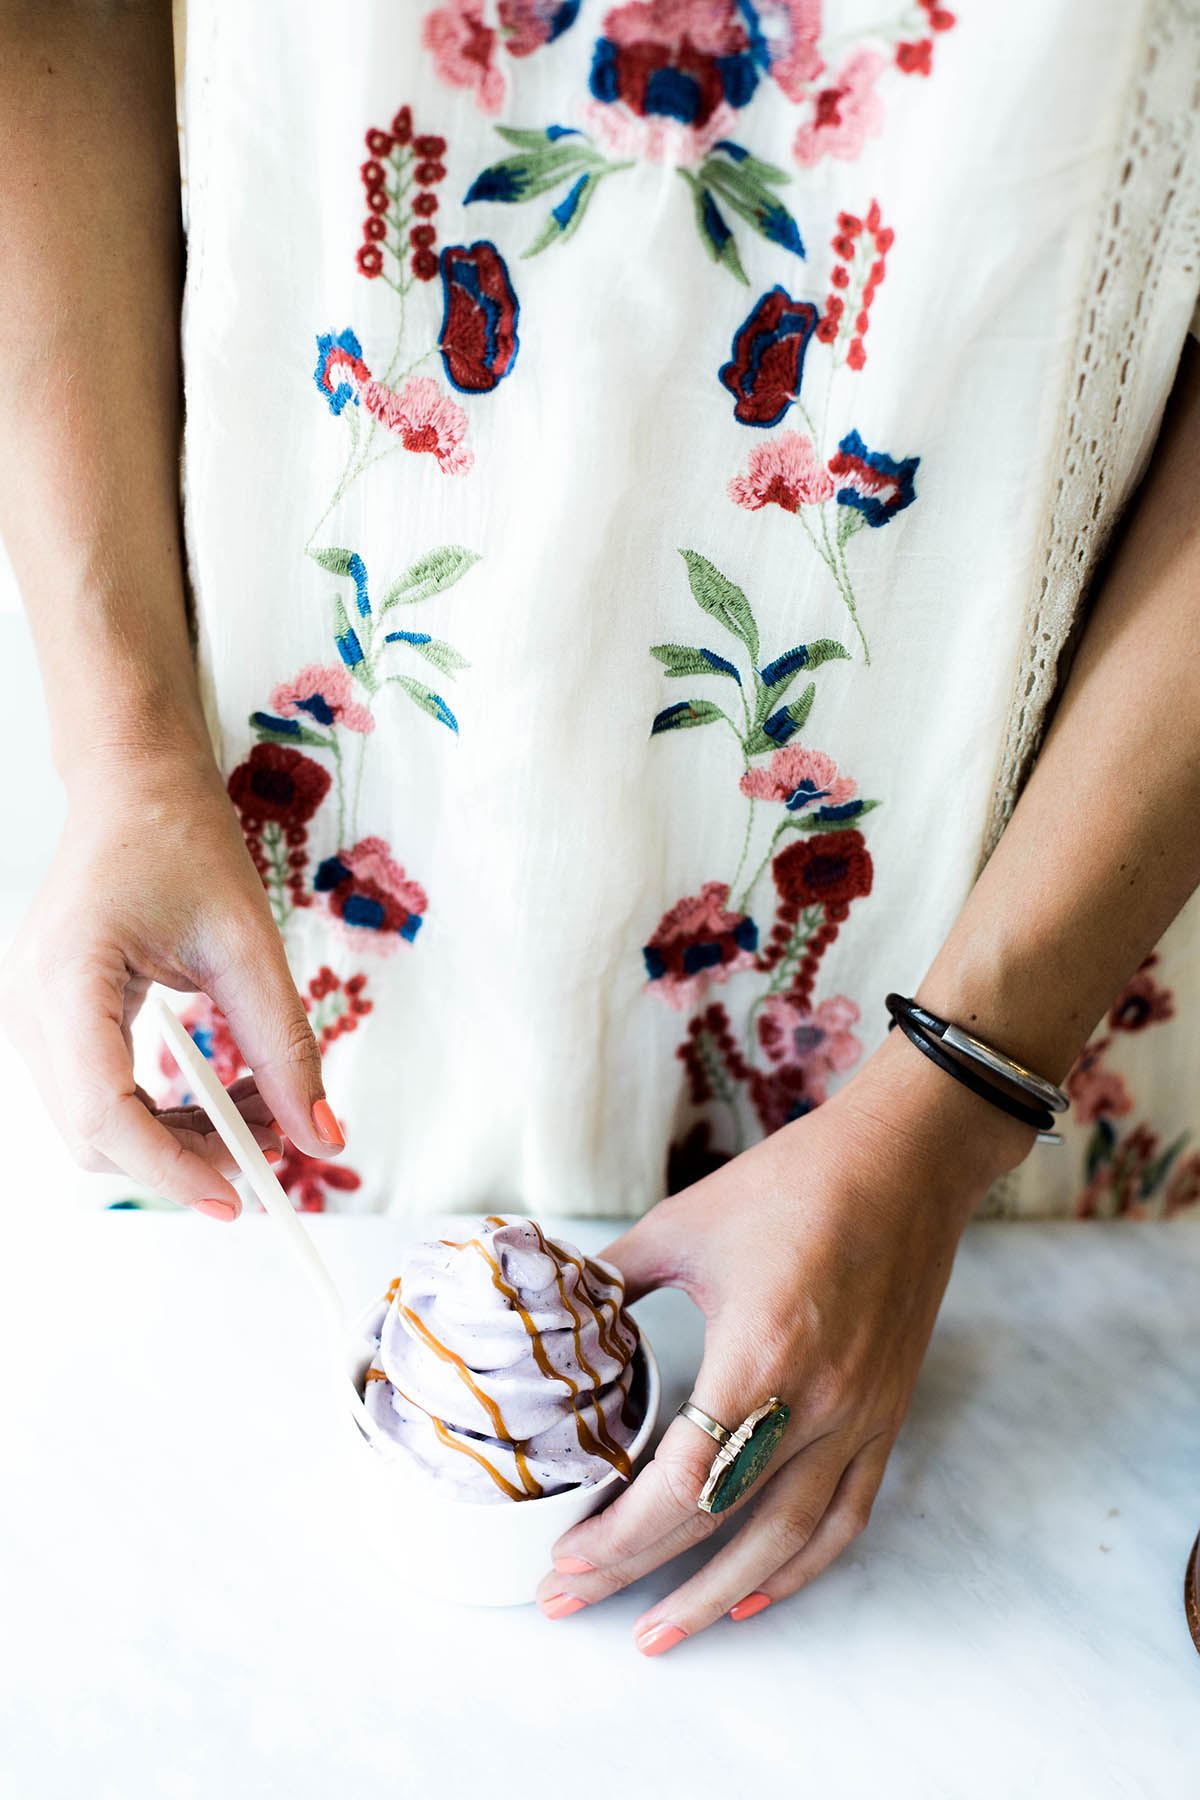 free people dress and loving cup ice cream